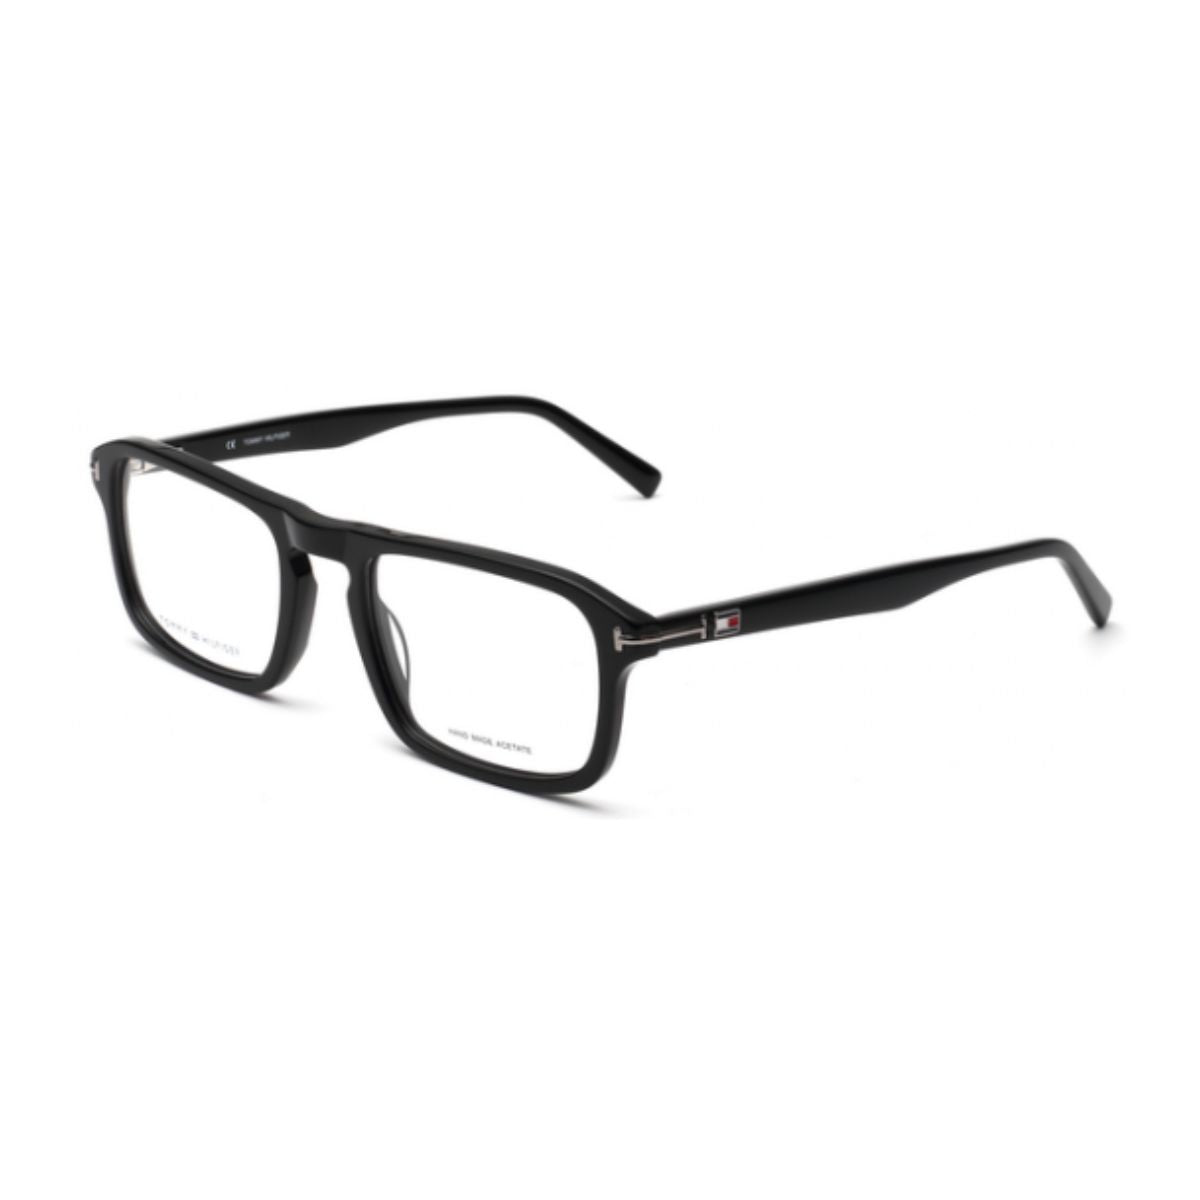 "Tommy Hilfiger 3235 C1 trendy eyewear & power glasses frame for men's and women's at optorium"